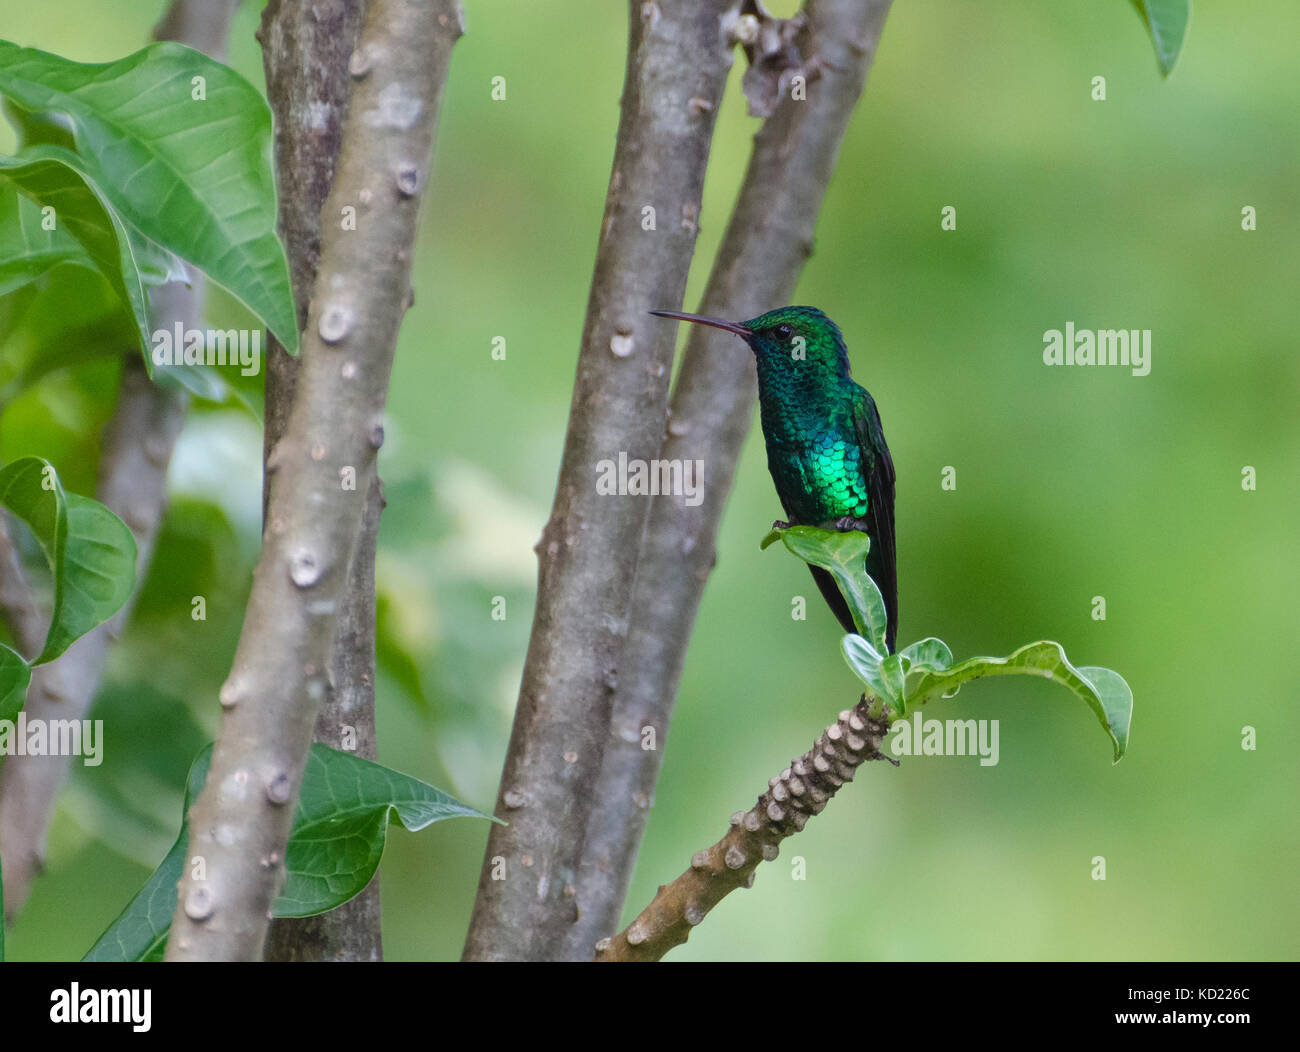 Blue-chinned Sapphire (Chlorestes notata notata) showing iridescent metallic blue and green feathers the rain forest Trinidad Stock Photo